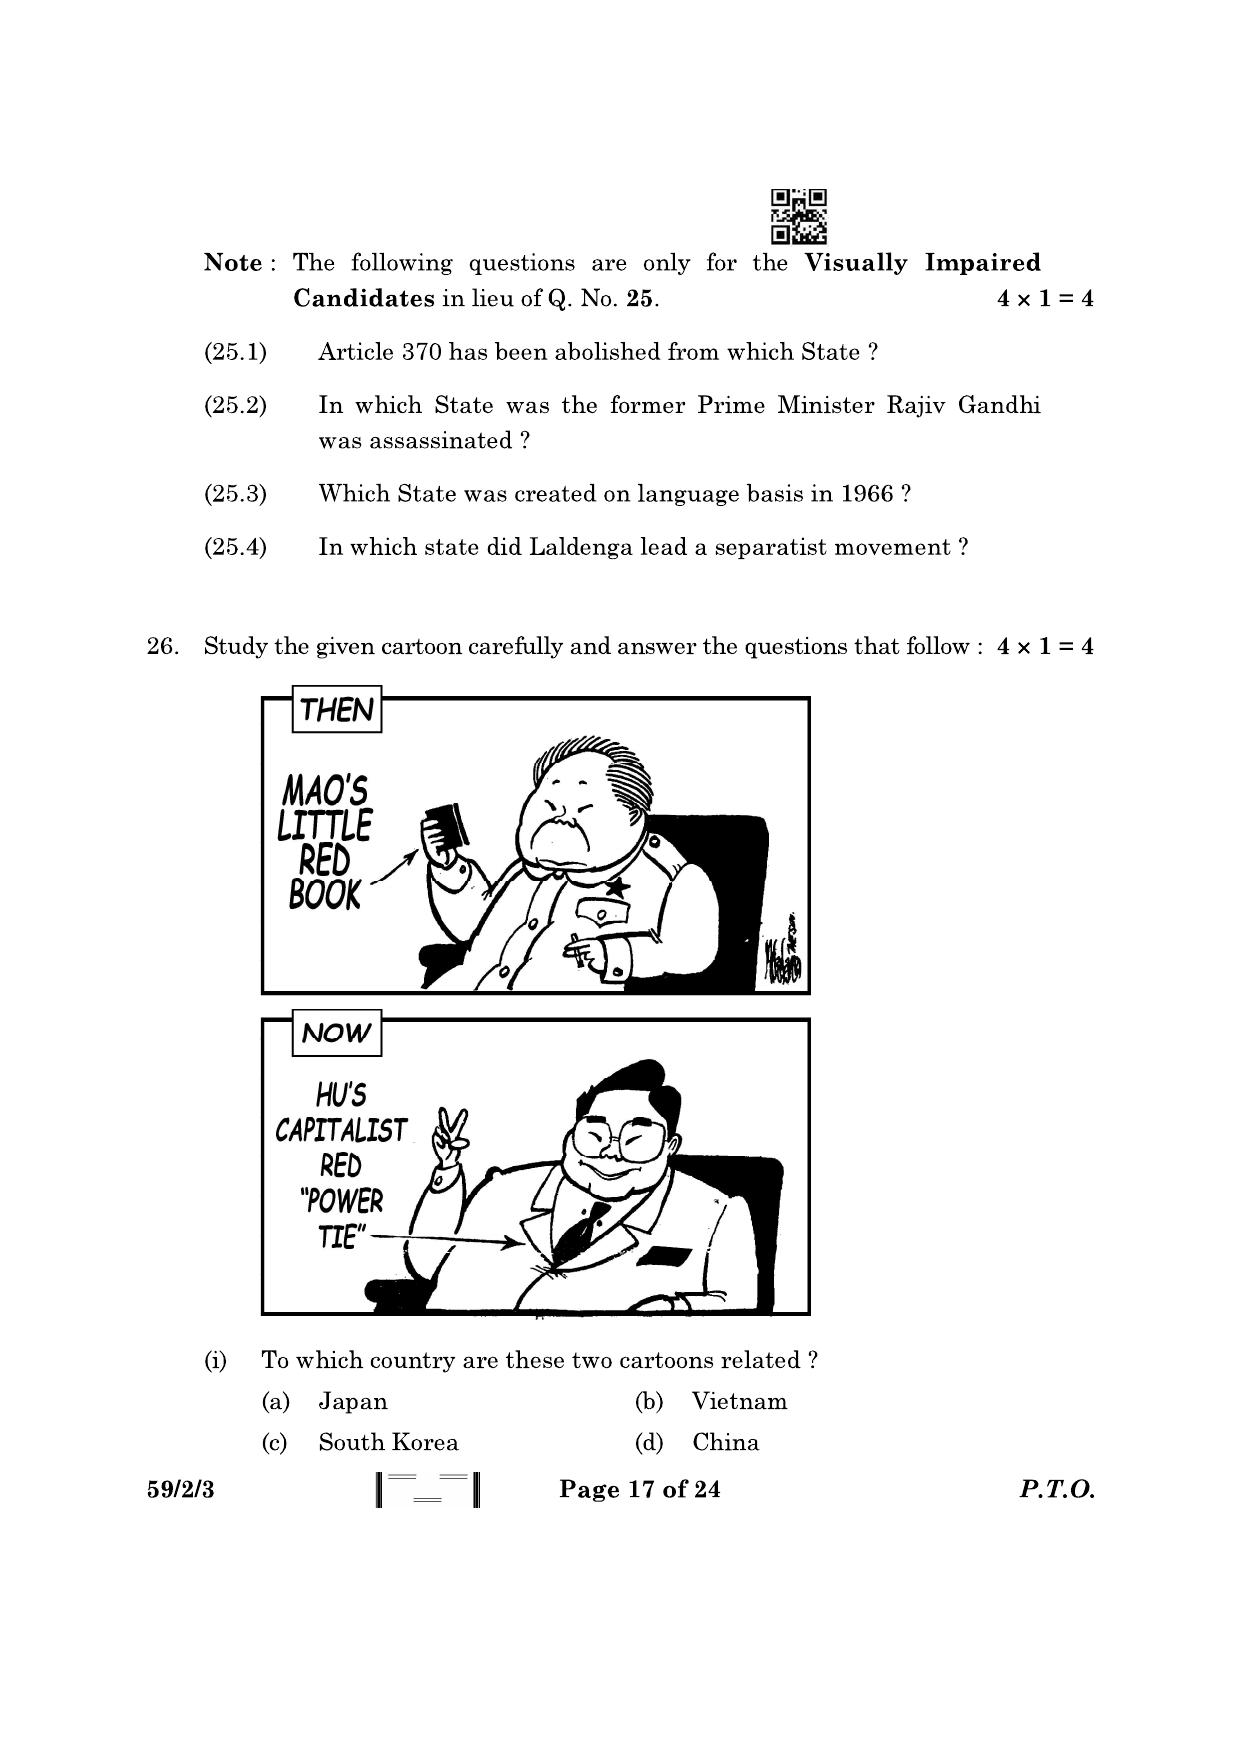 CBSE Class 12 59-2-3 Political Science 2023 Question Paper - Page 17